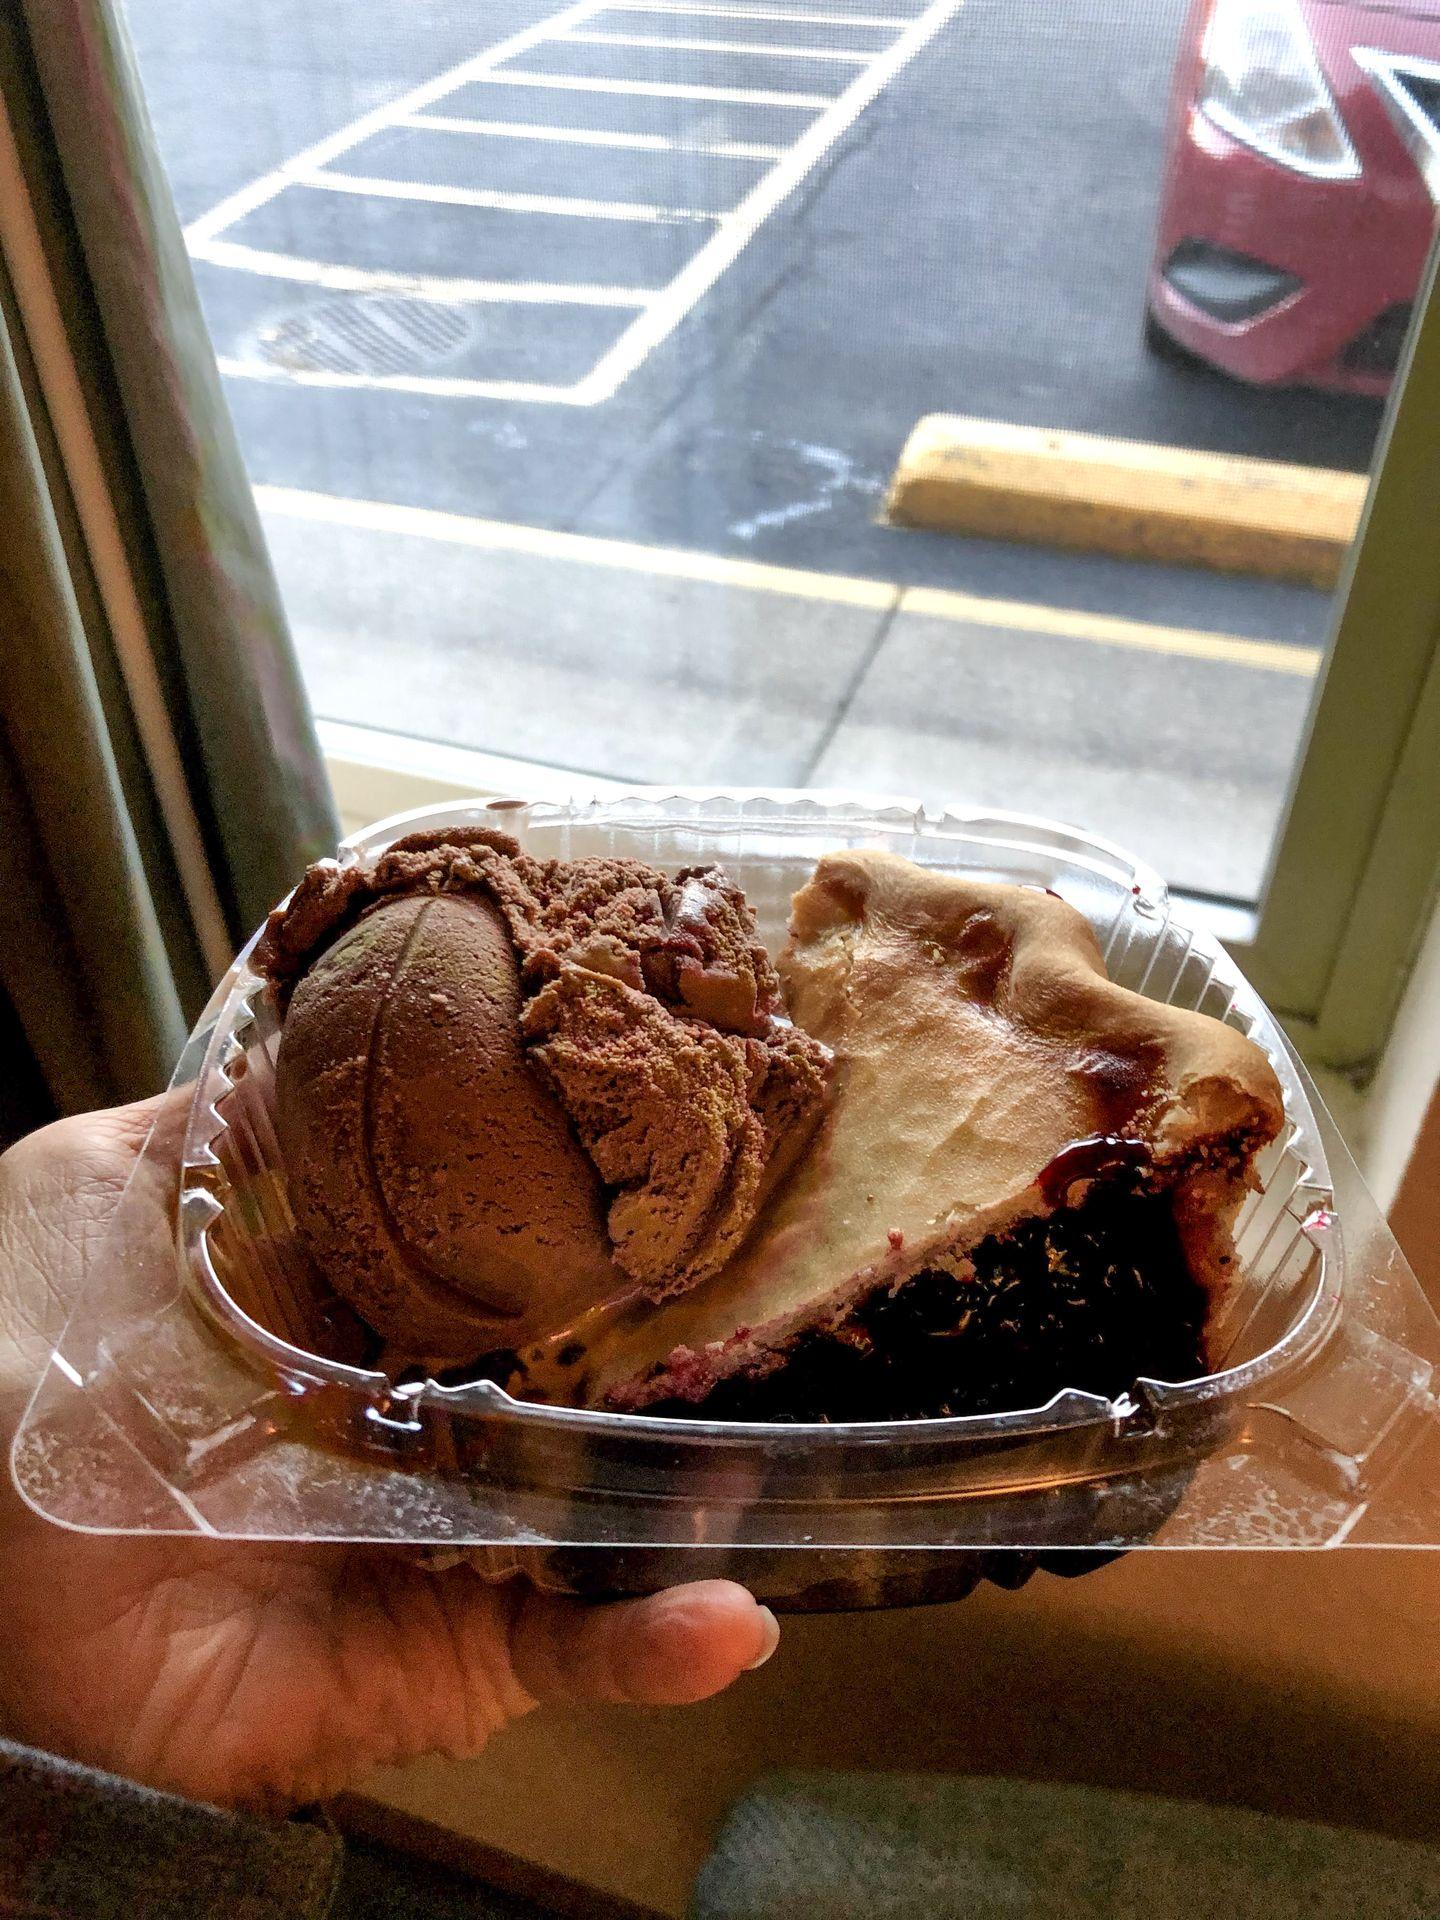 Holding up a plastic container with a slice of pie and a scoop of chocolate ice cream.